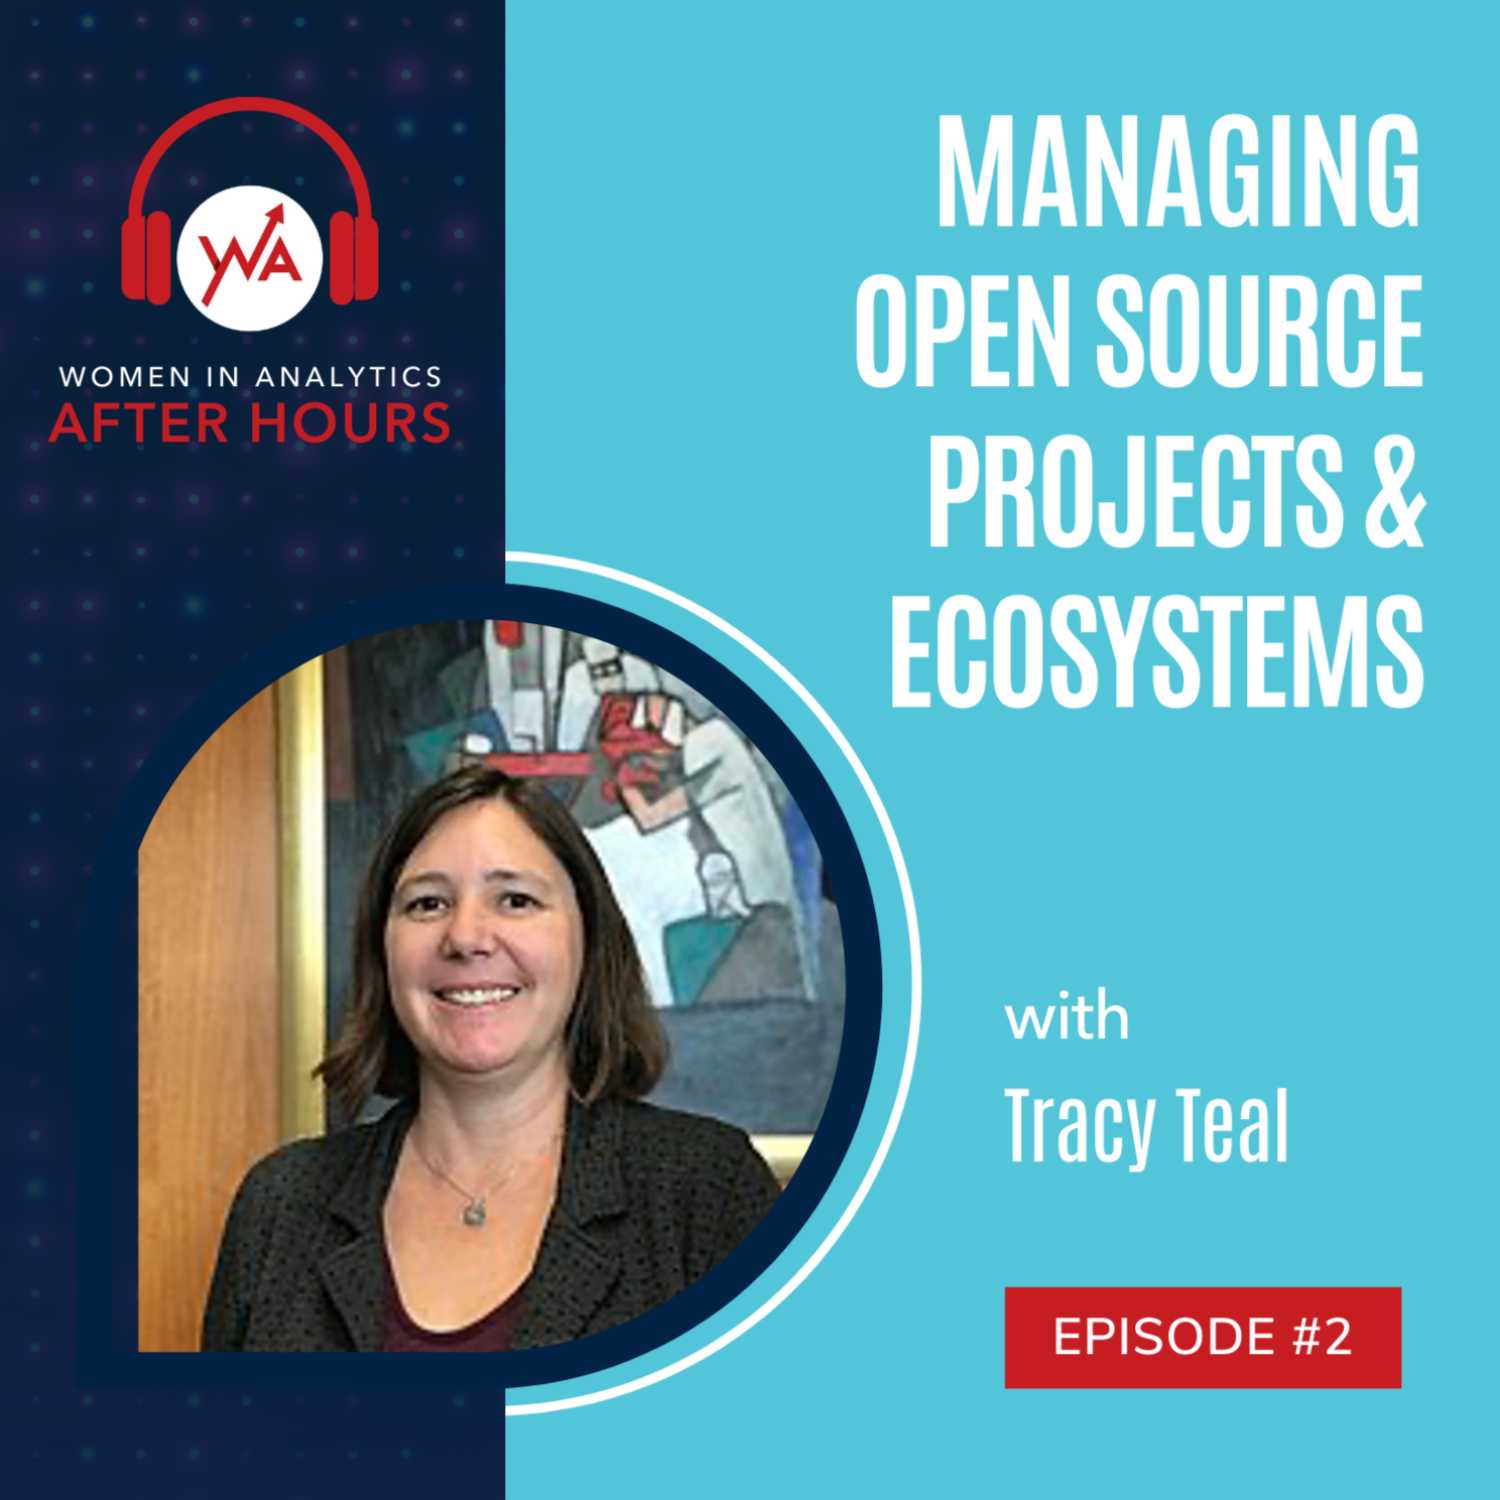 Episode 2 - Managing Open Source Projects and Ecosystems with Tracy Teal